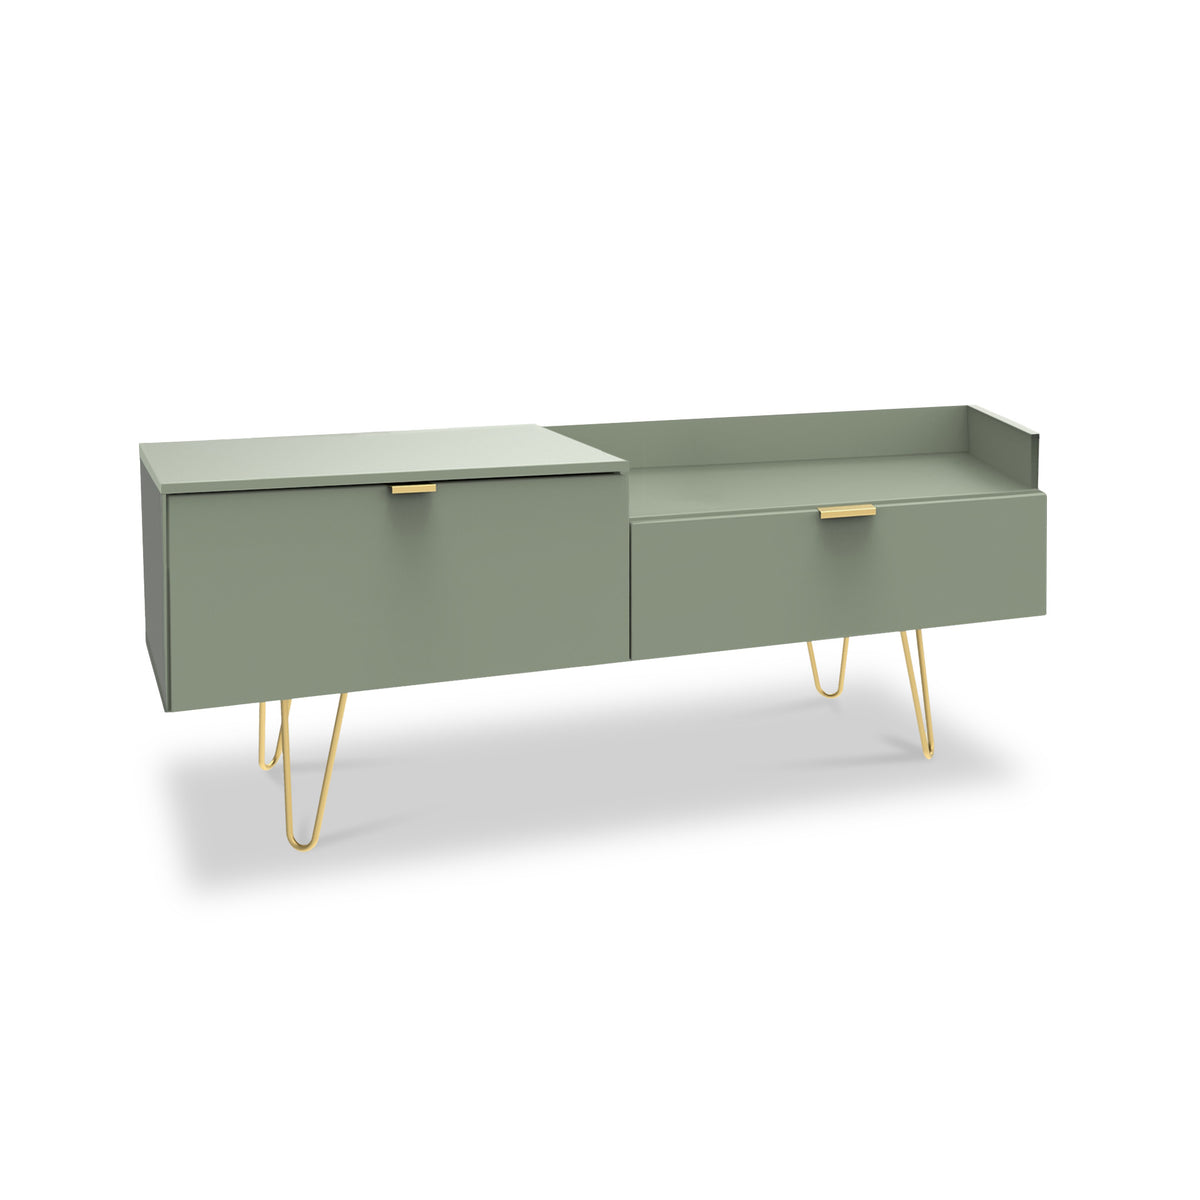 Moreno Olive Green TV Console Unit from Roseland Furniture